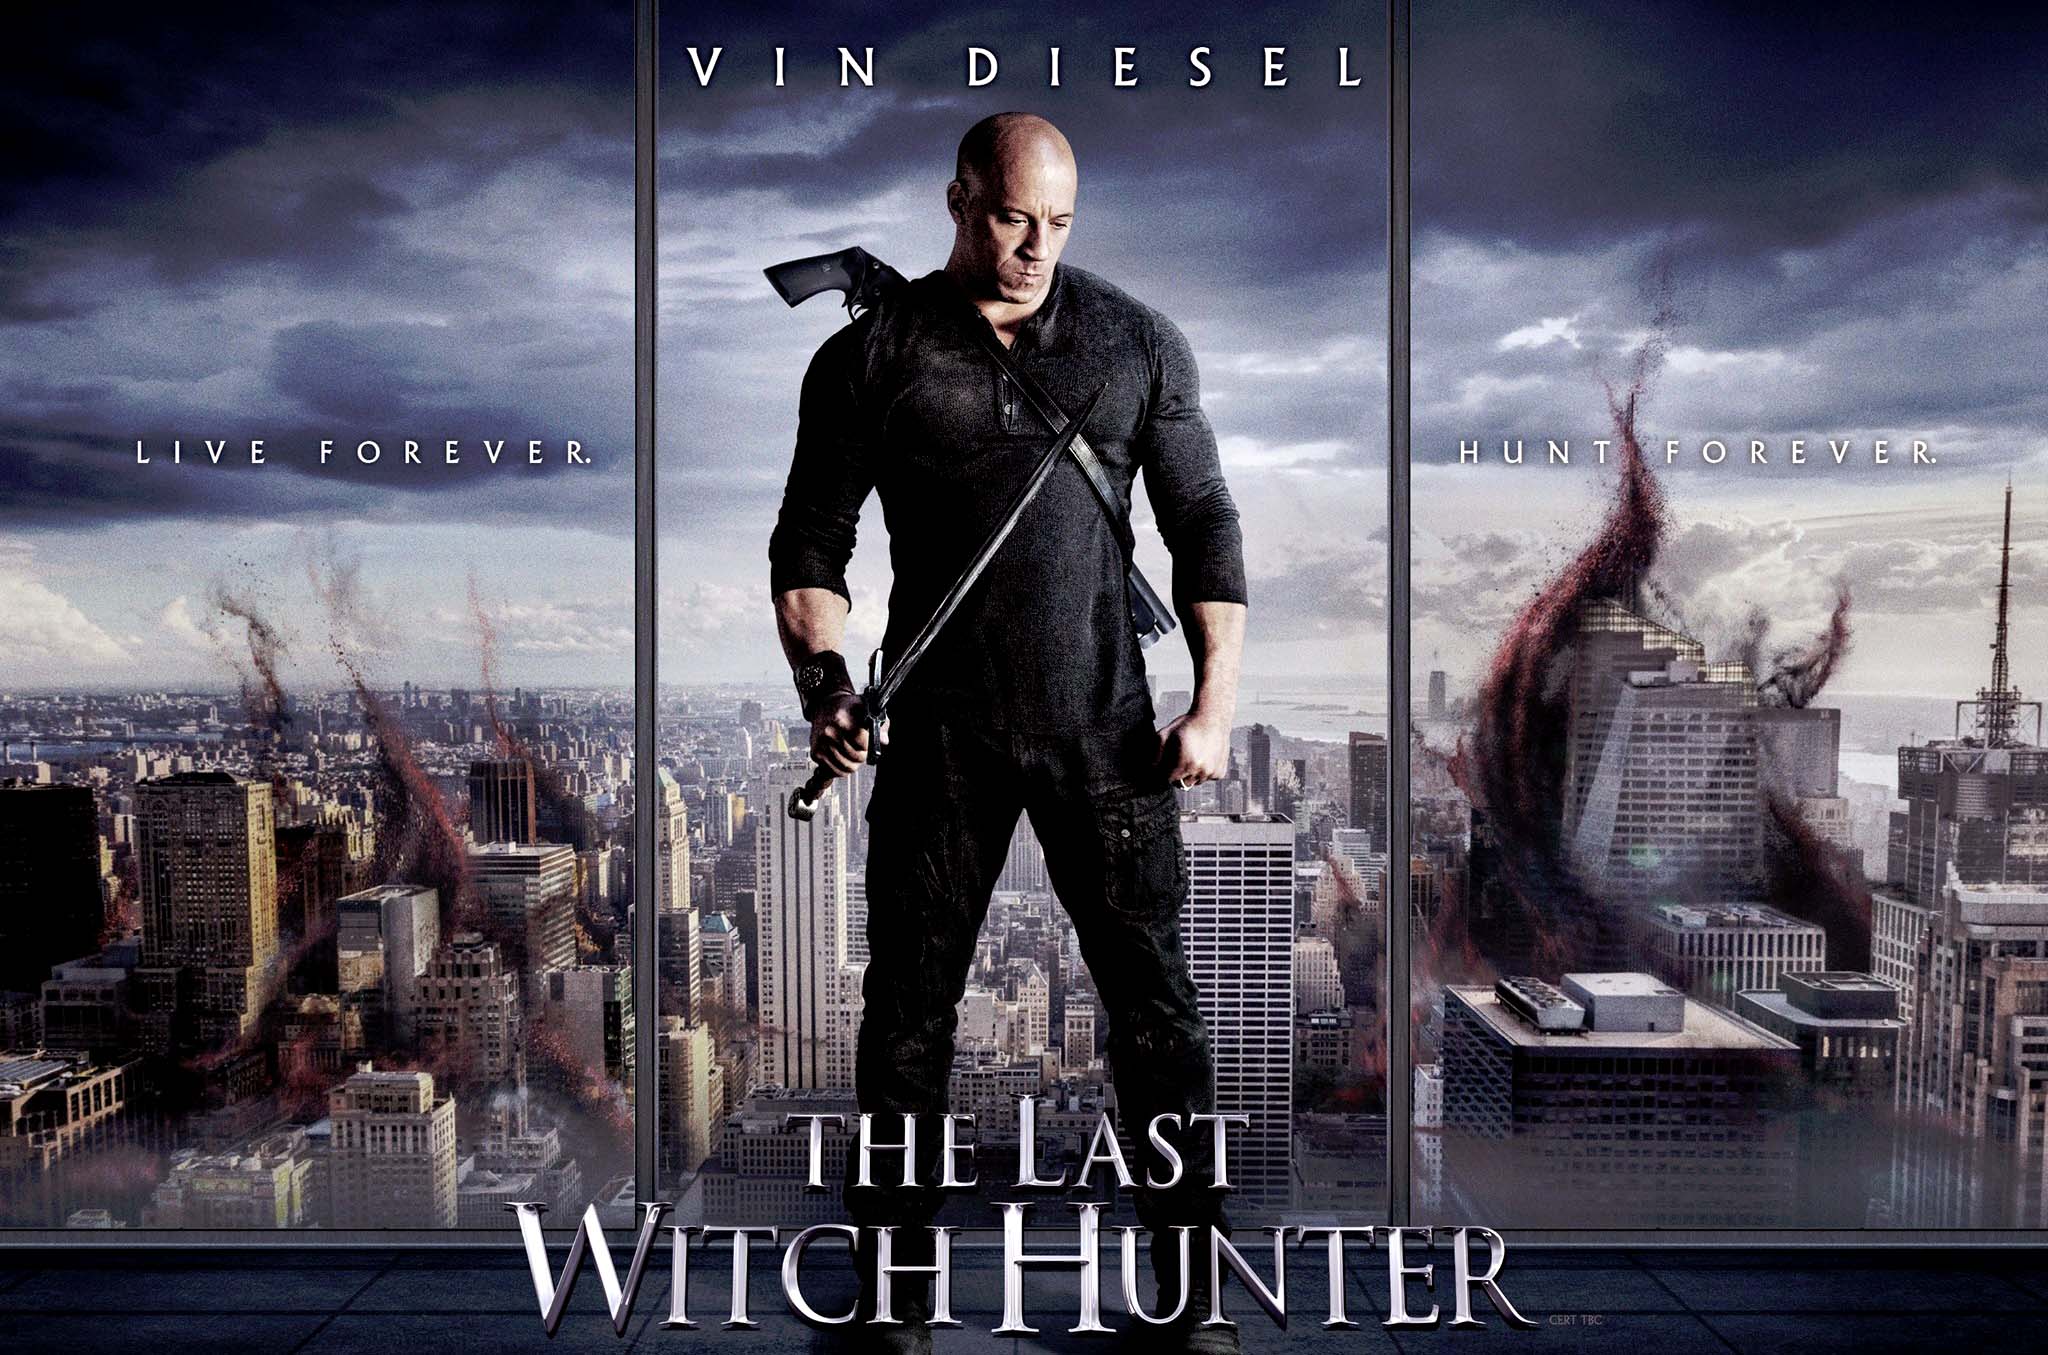 where can i watch the last witch hunter online for free